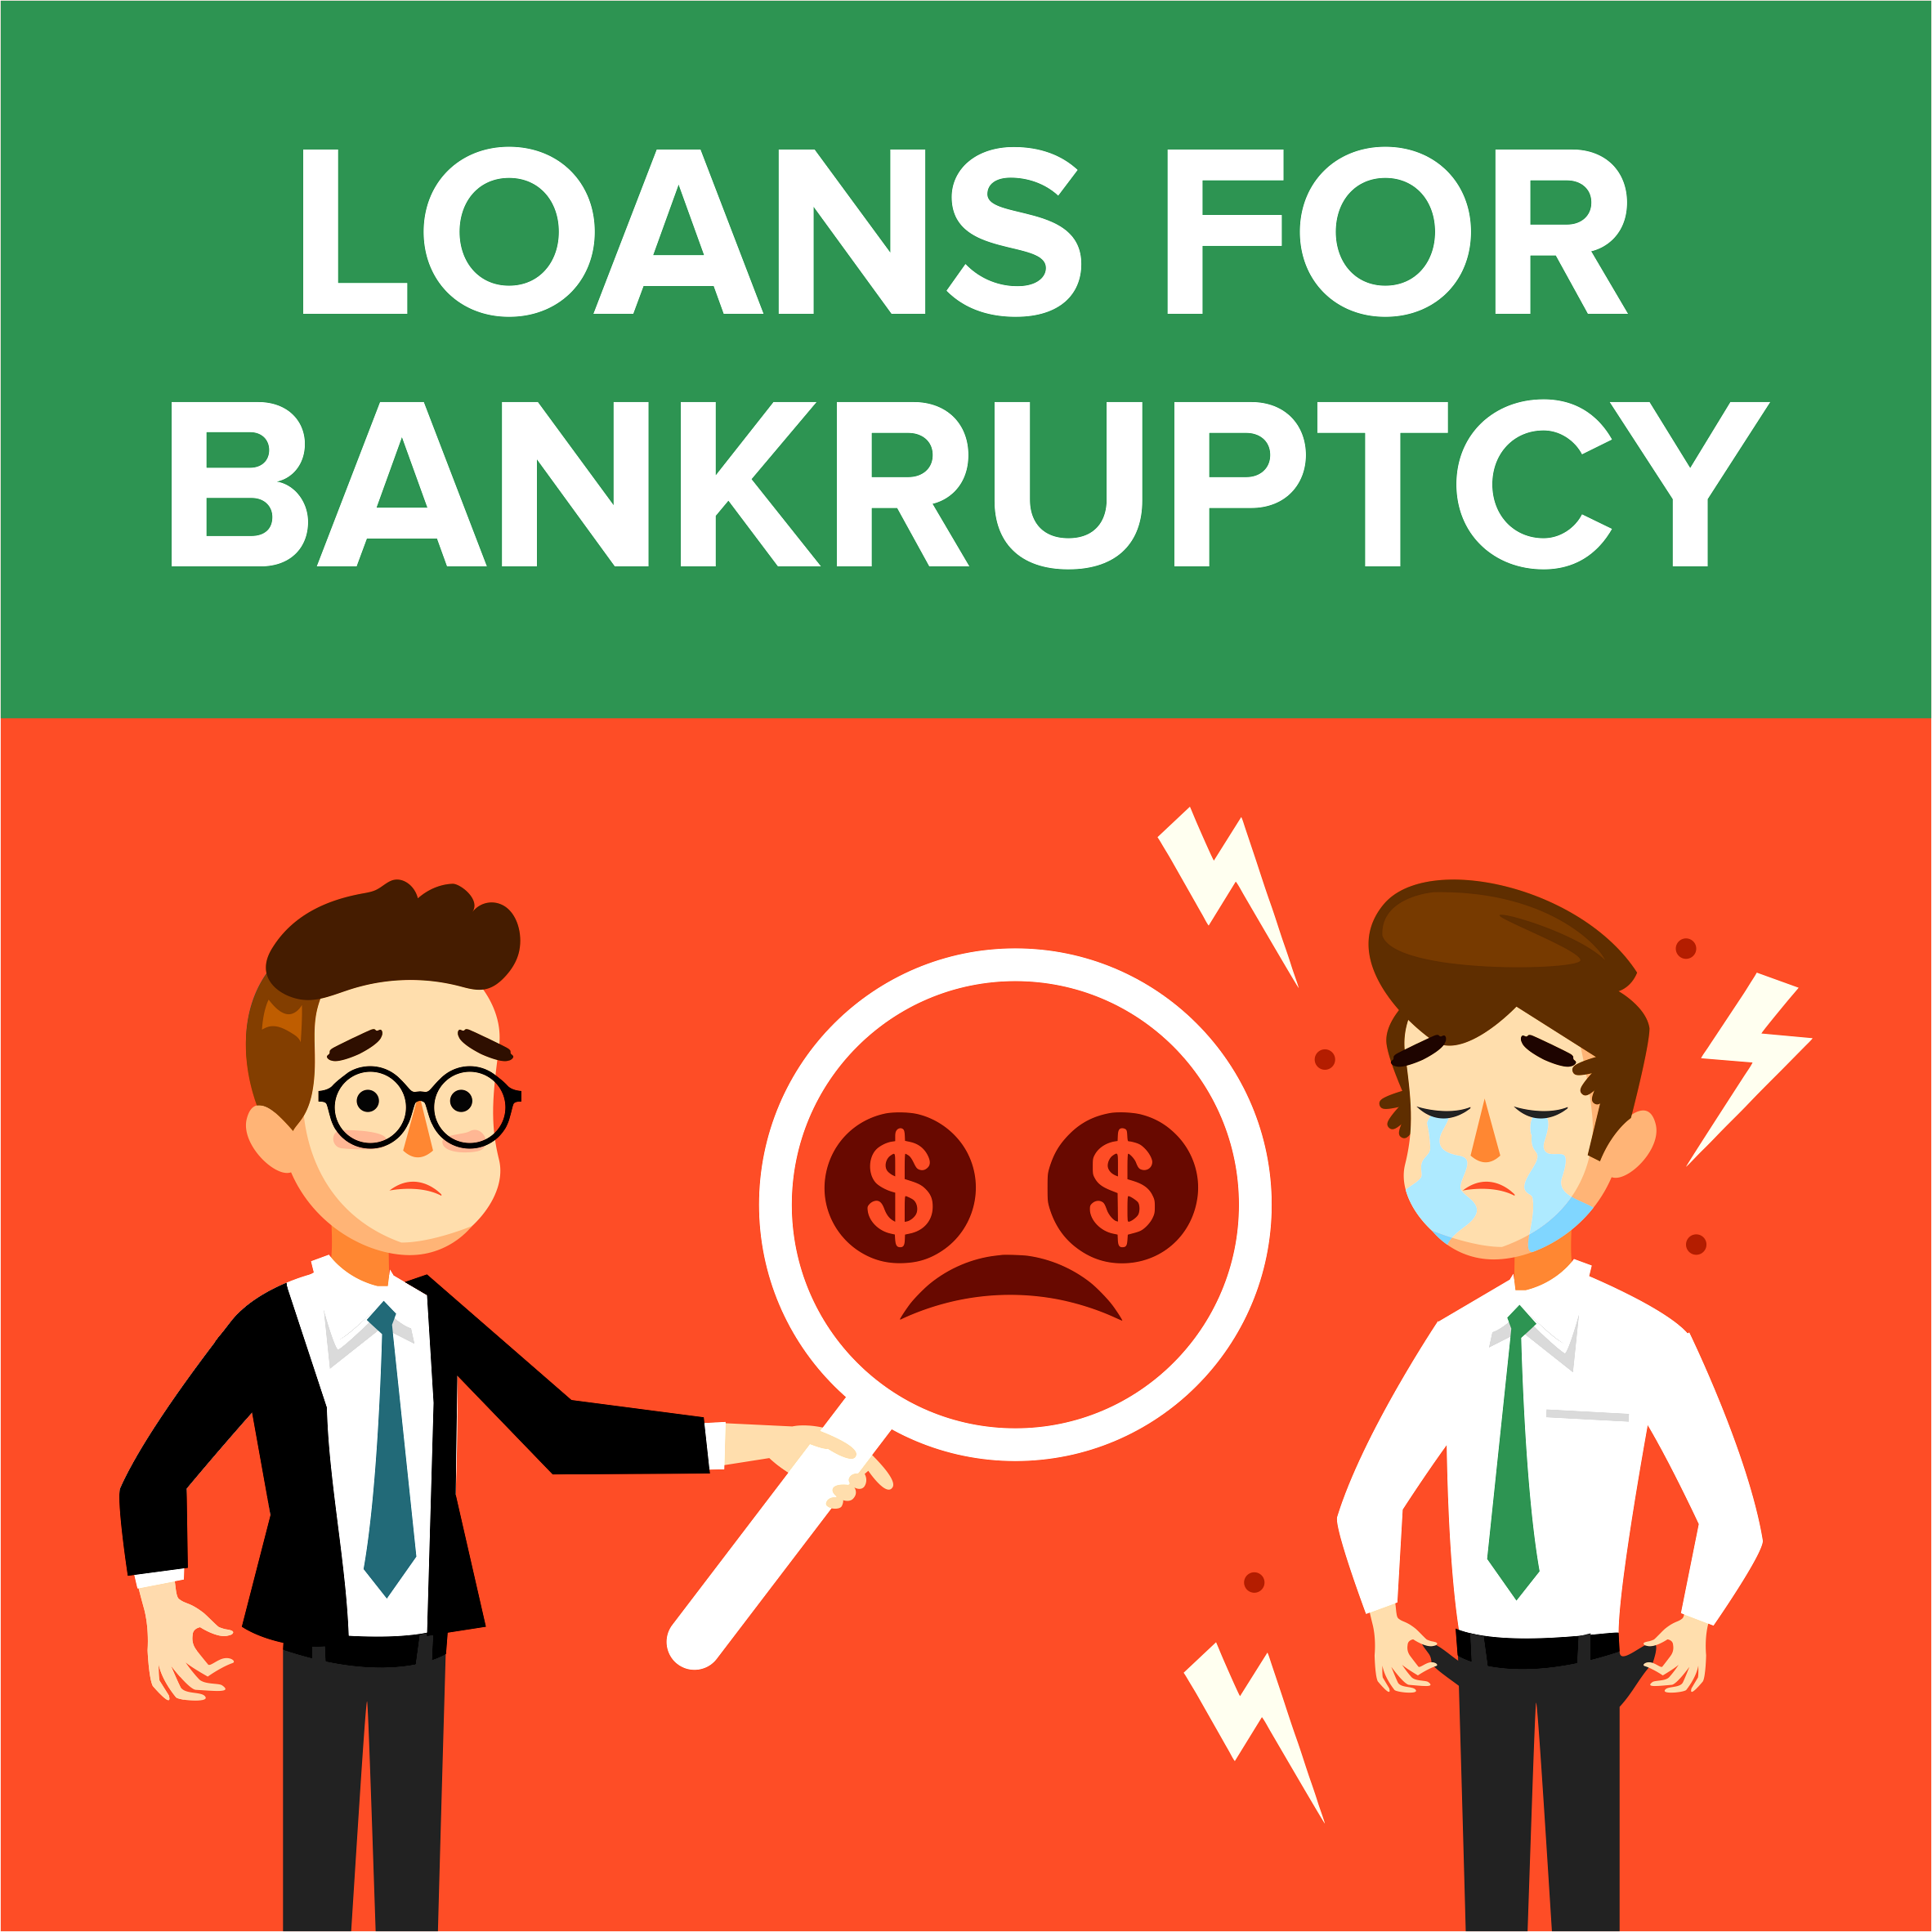 Loans for Bankruptcy